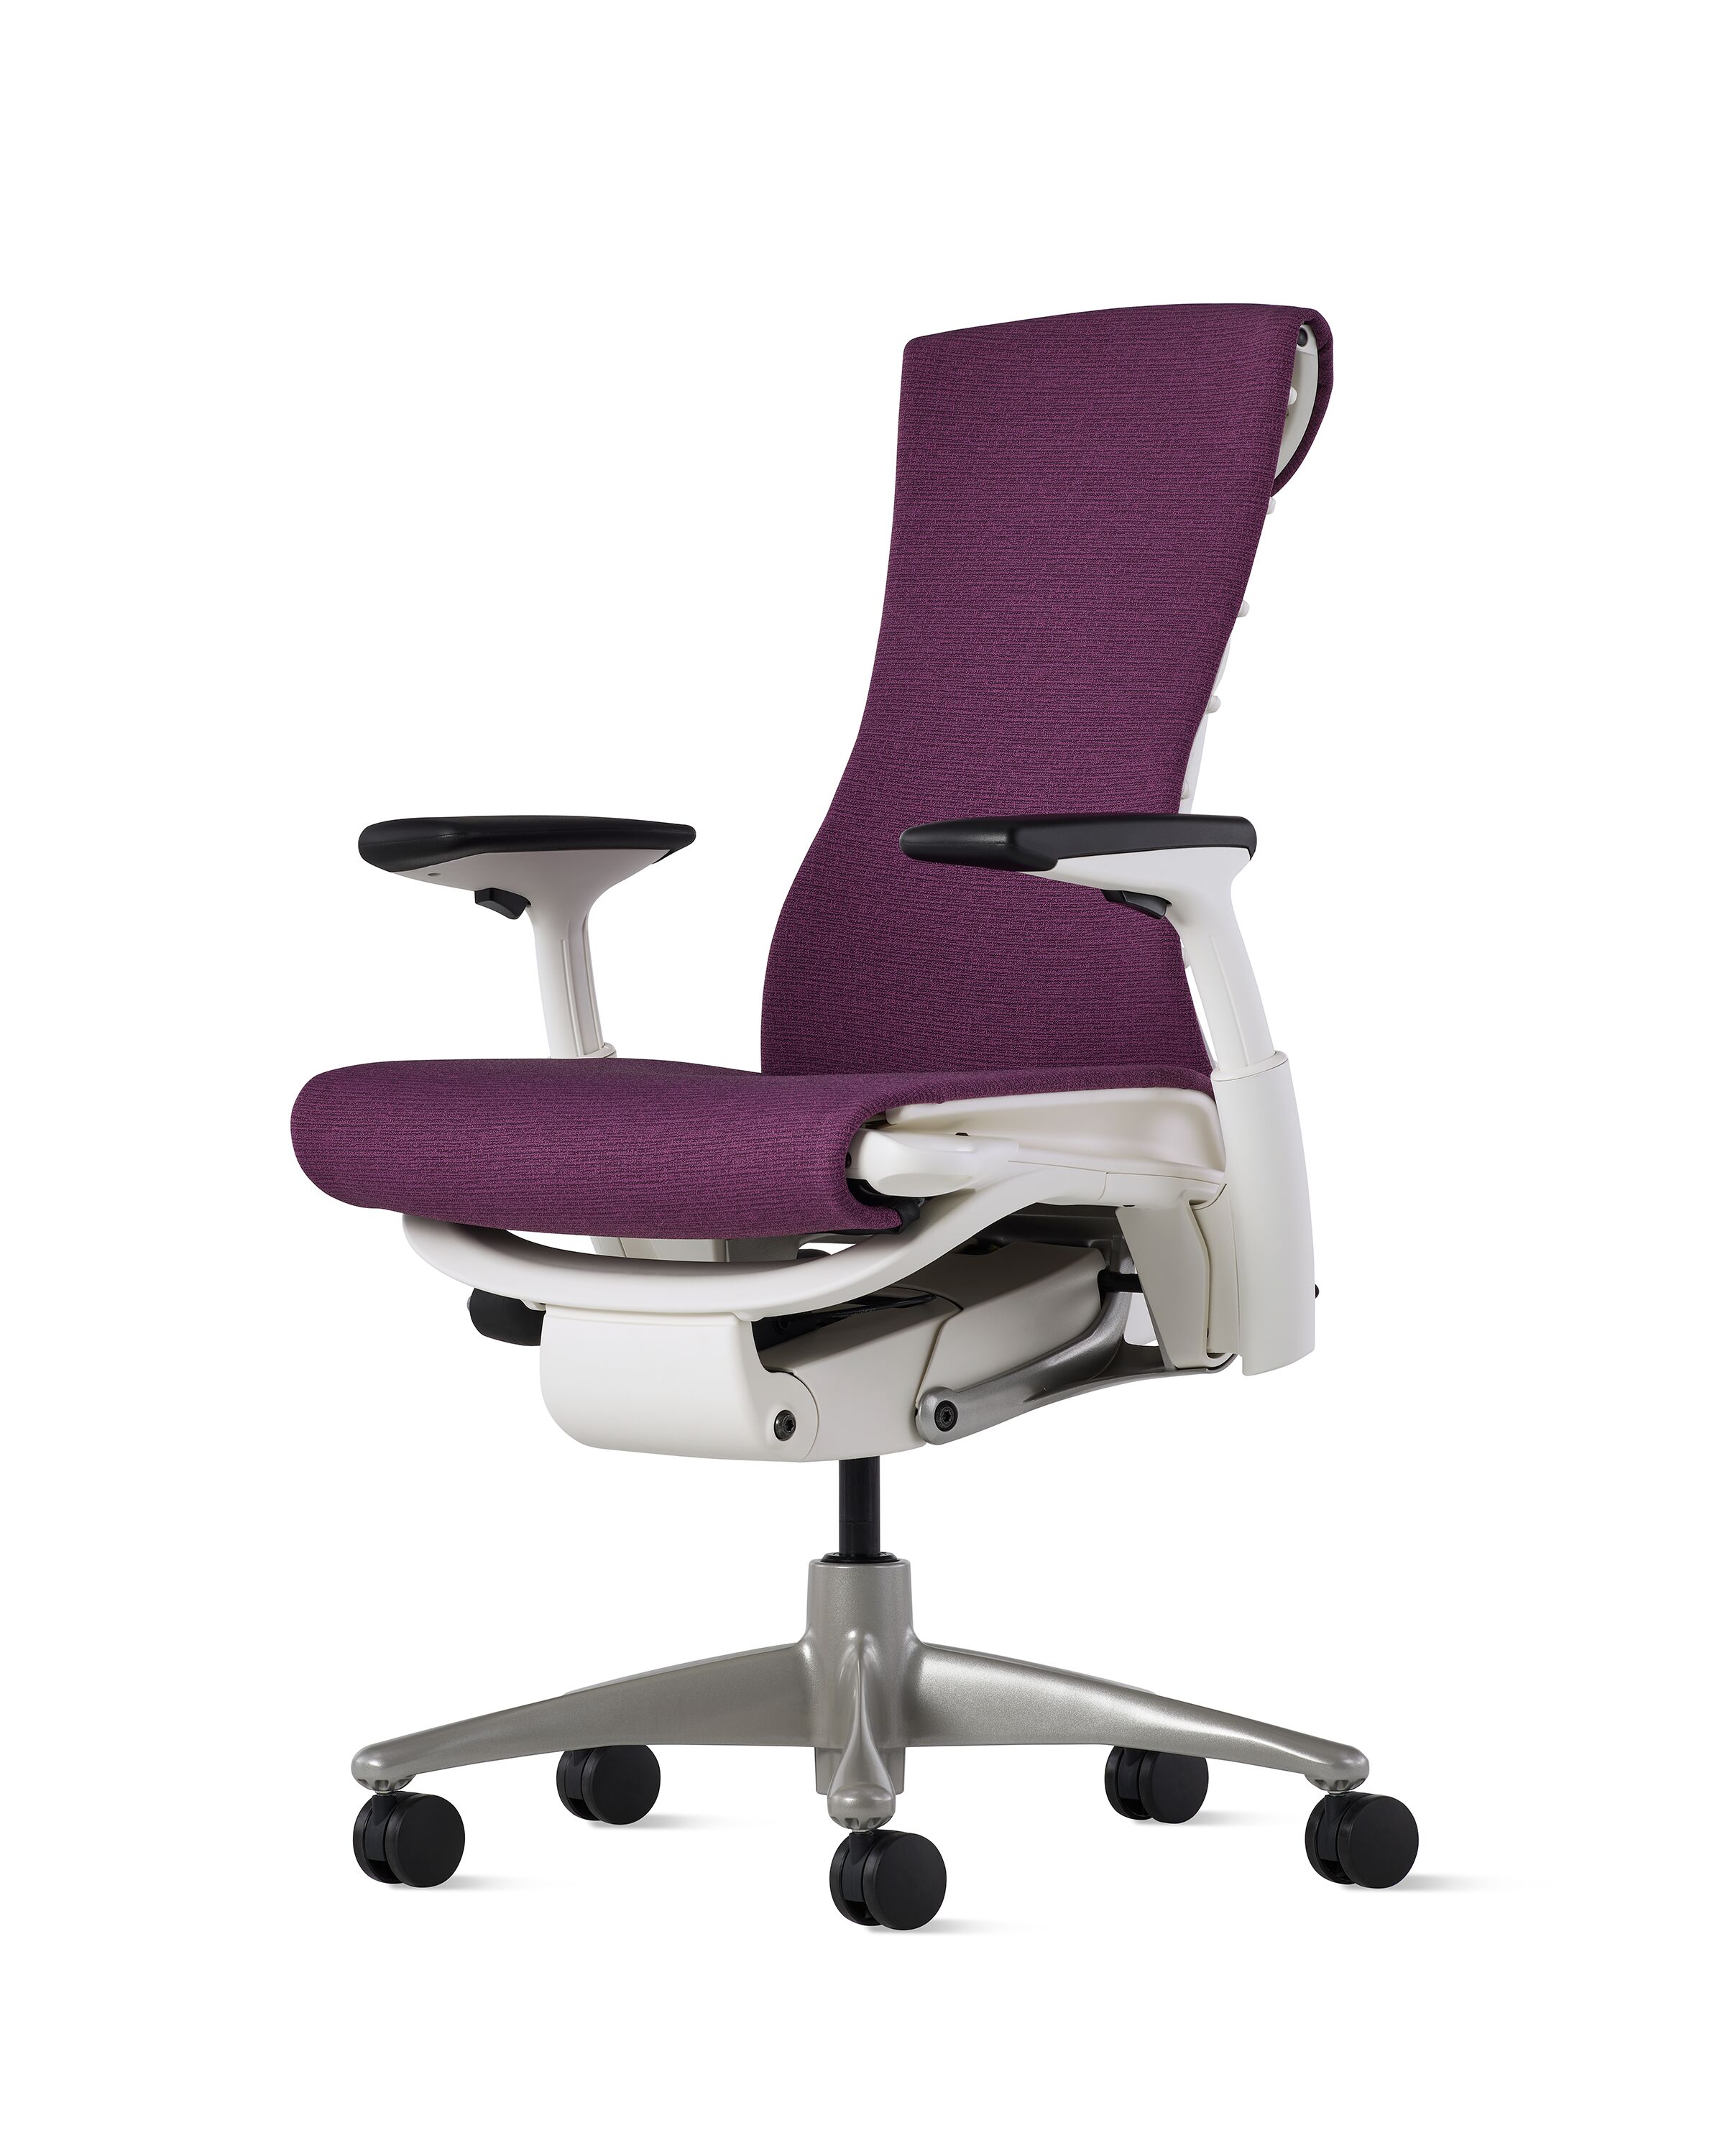 front view of purple embody chair